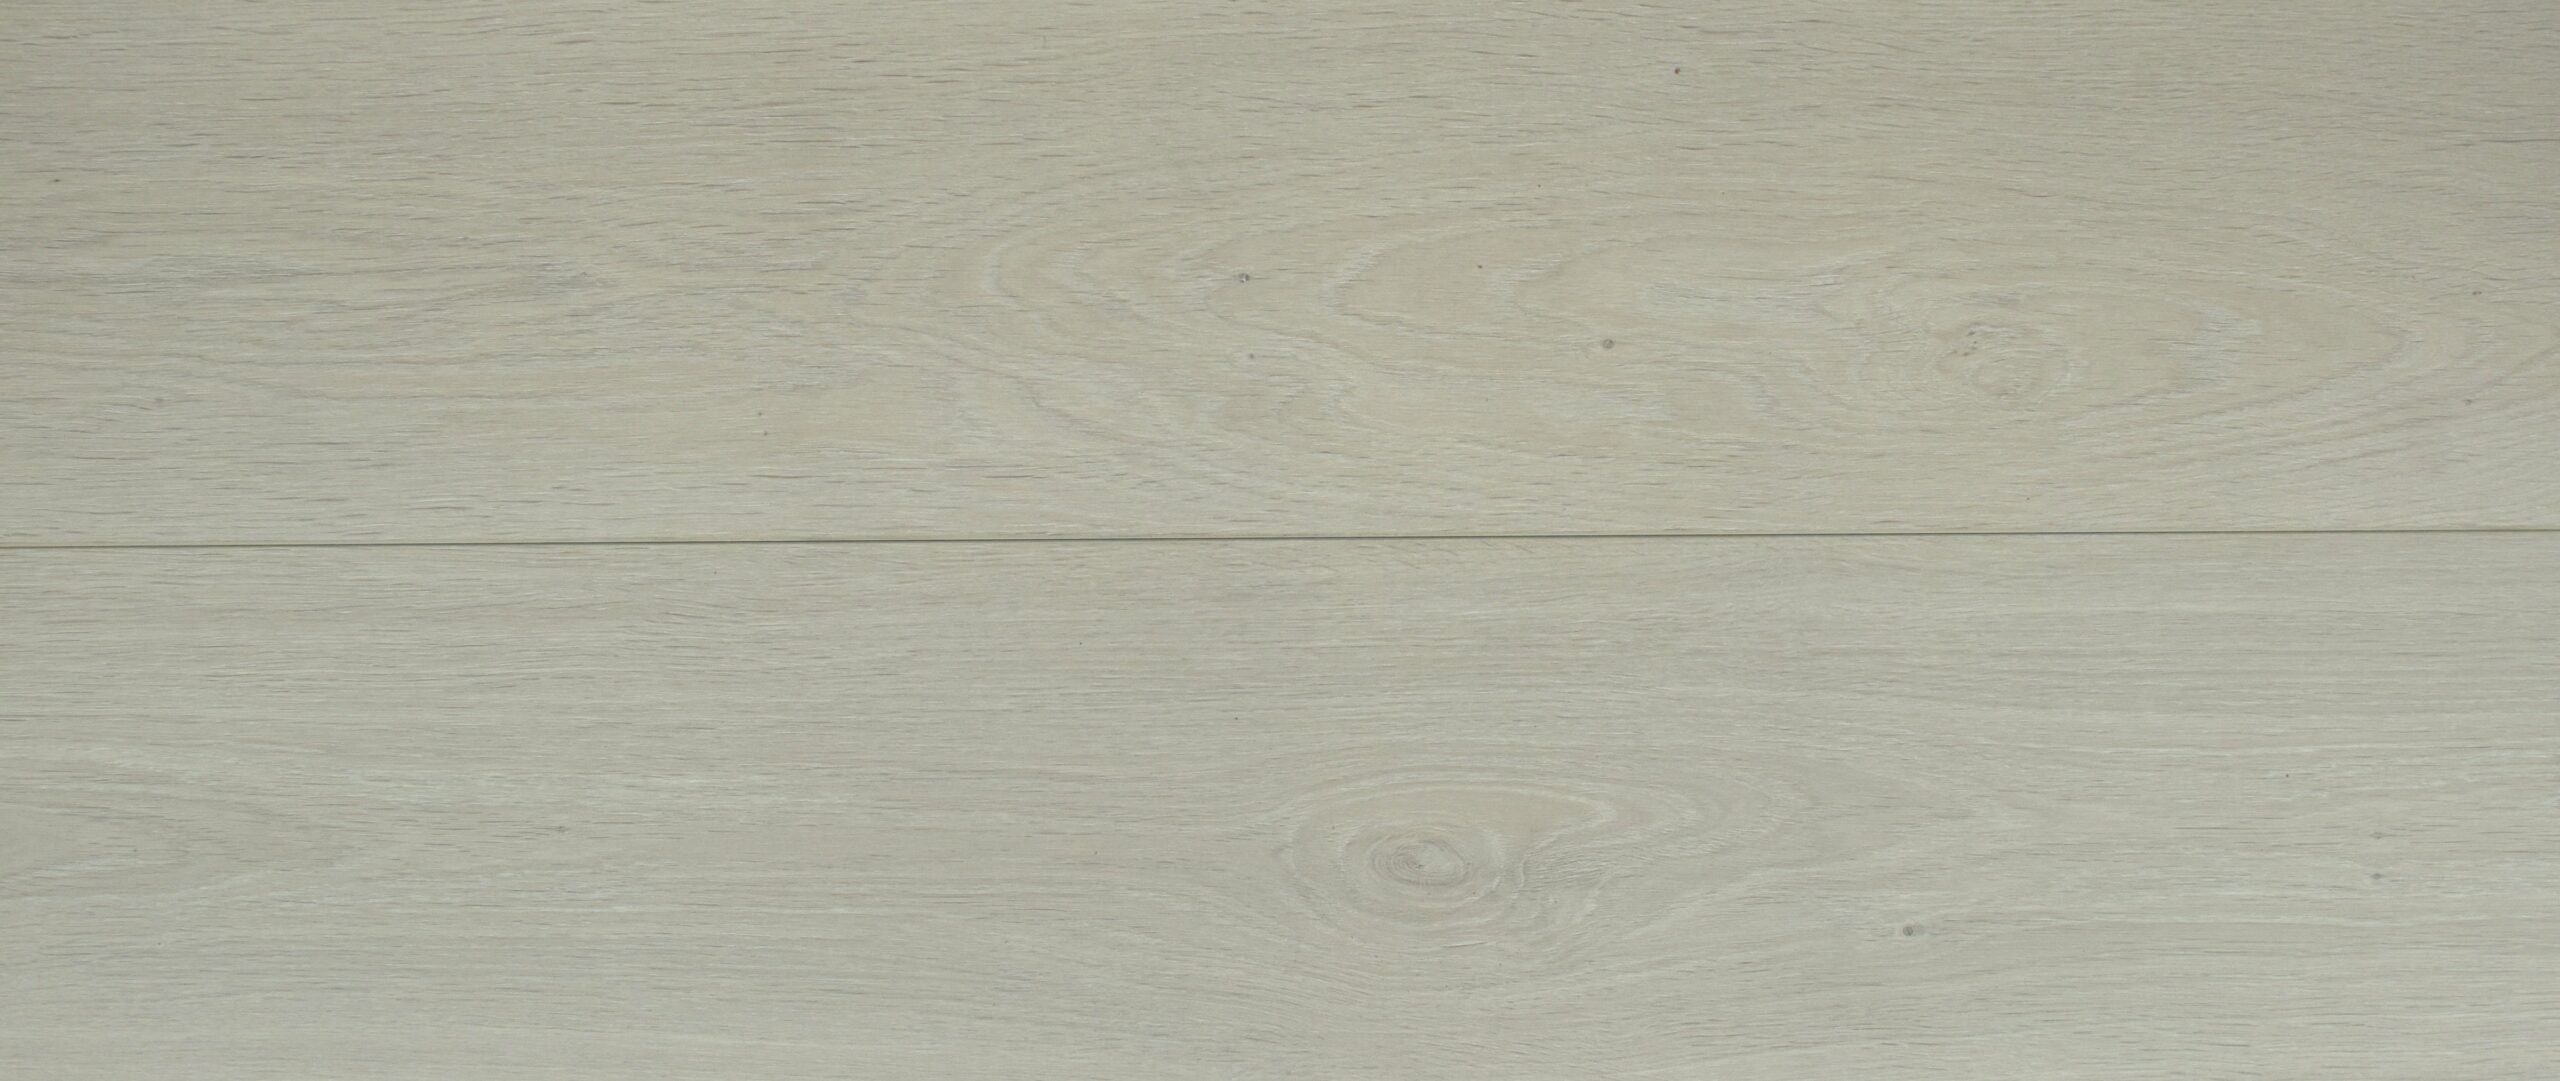 White Oak Optimum Laminate Flooring with Built-In EIR Backing and AC4 wear layer